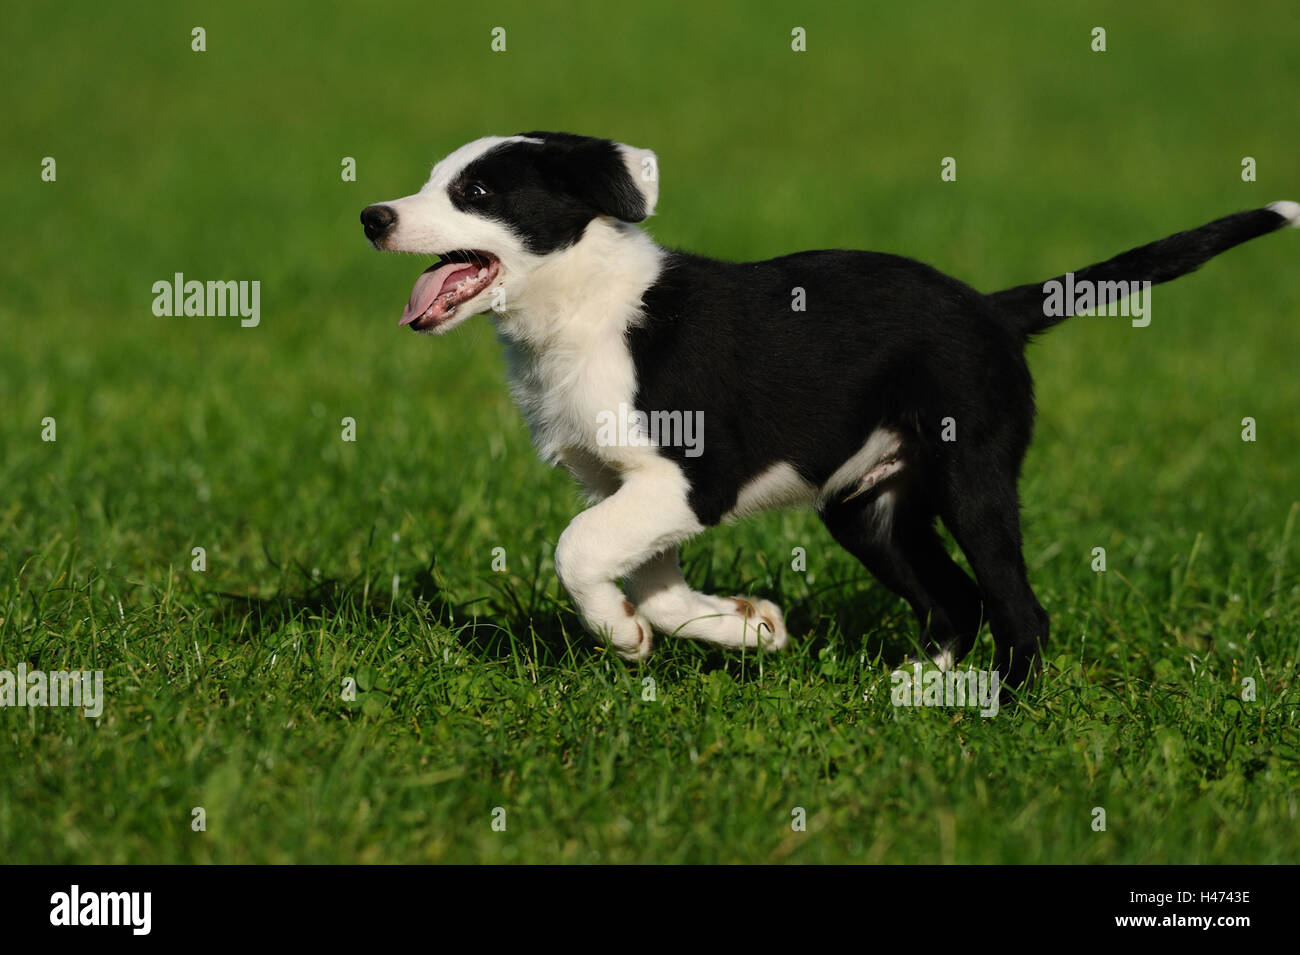 Of Border collie, puppy, run, side view Stock Photo - Alamy